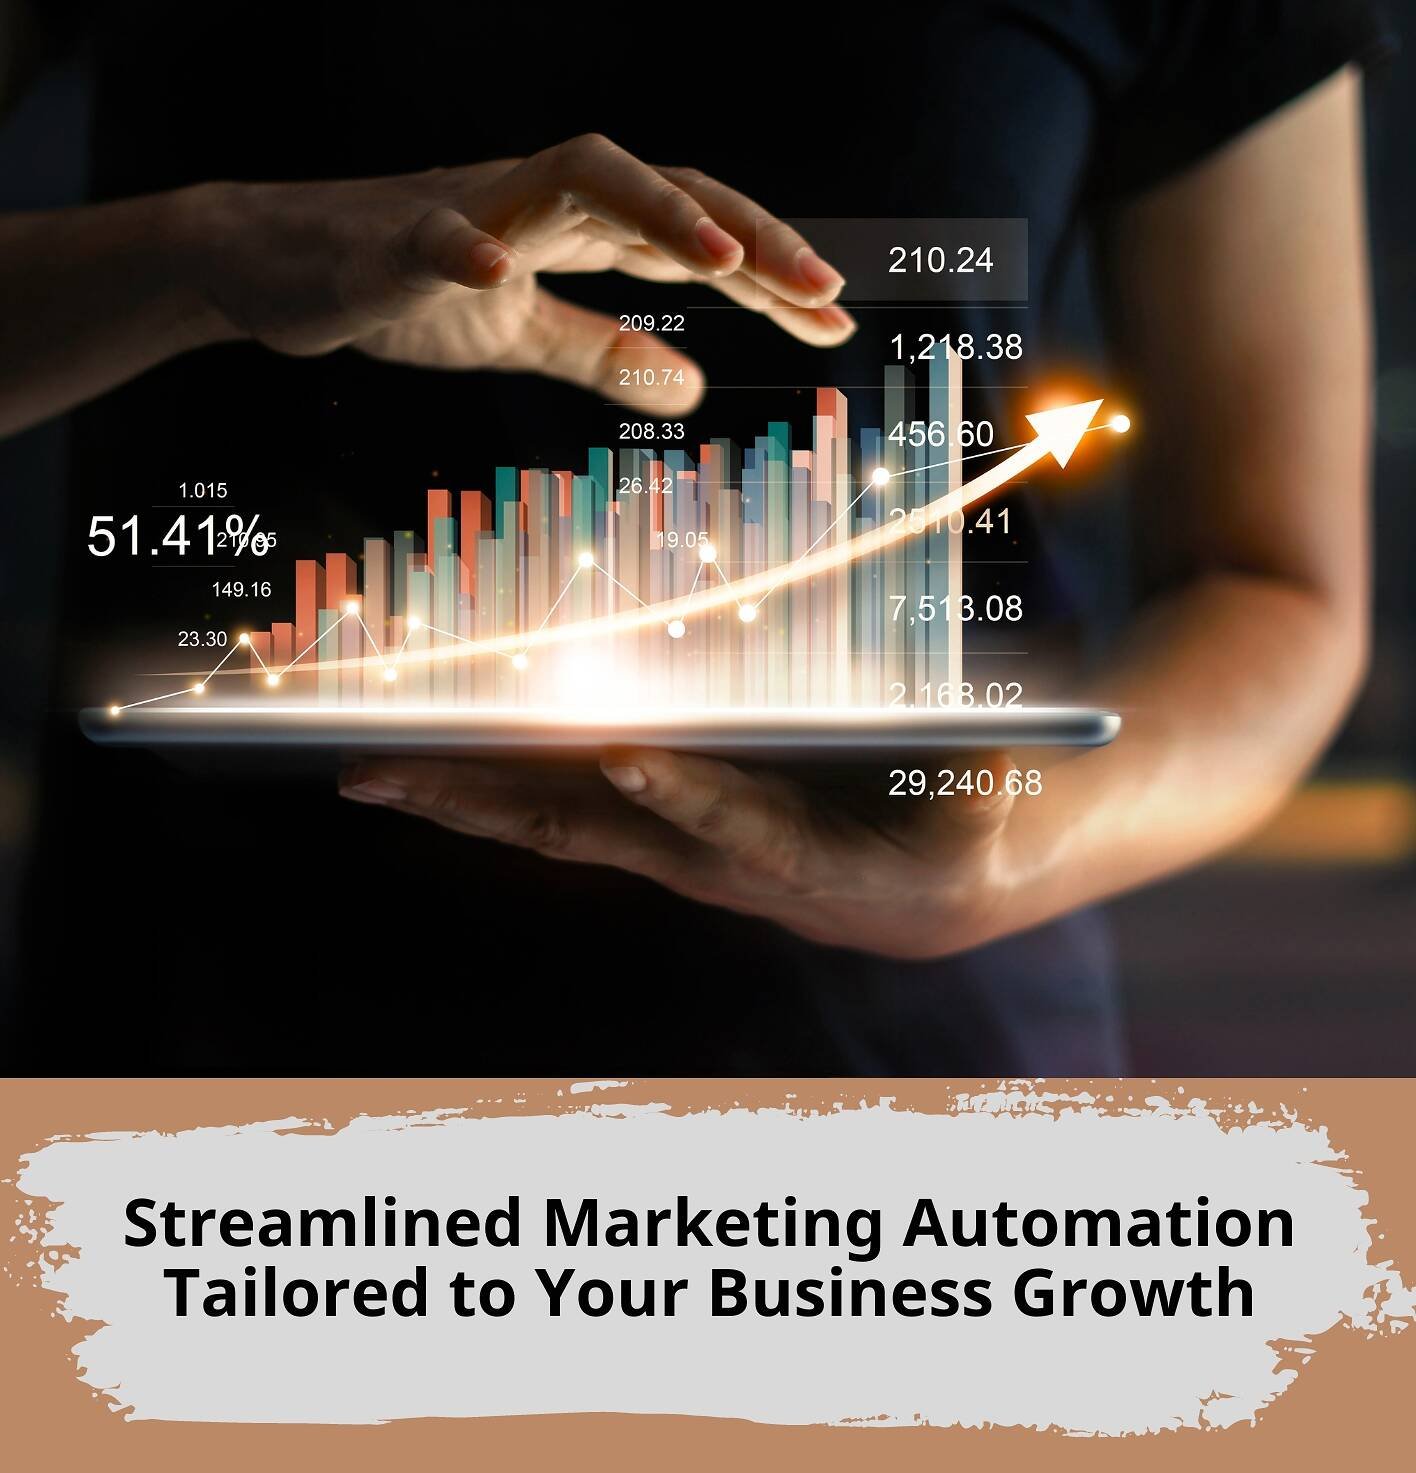 Streamlined Marketing Automation Tailored to Your Business Growth